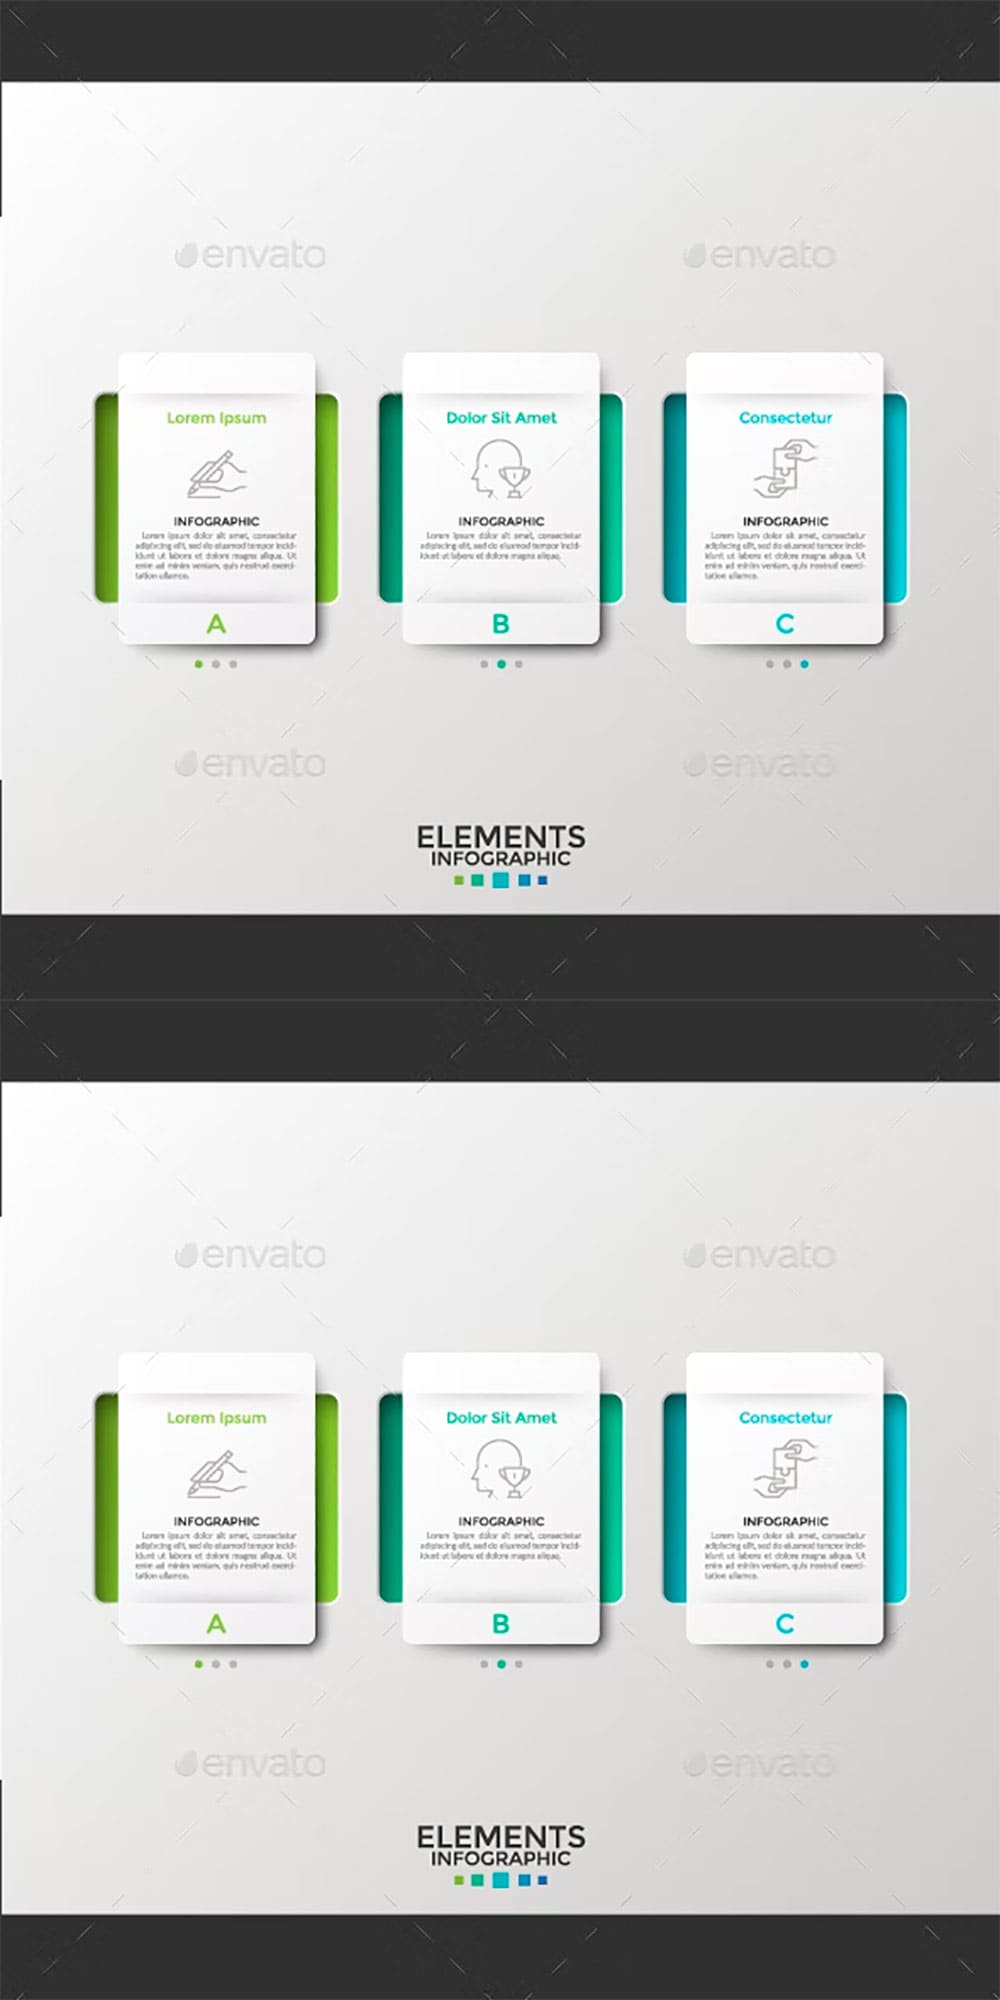 Paper infographic template, picture for pinterest.